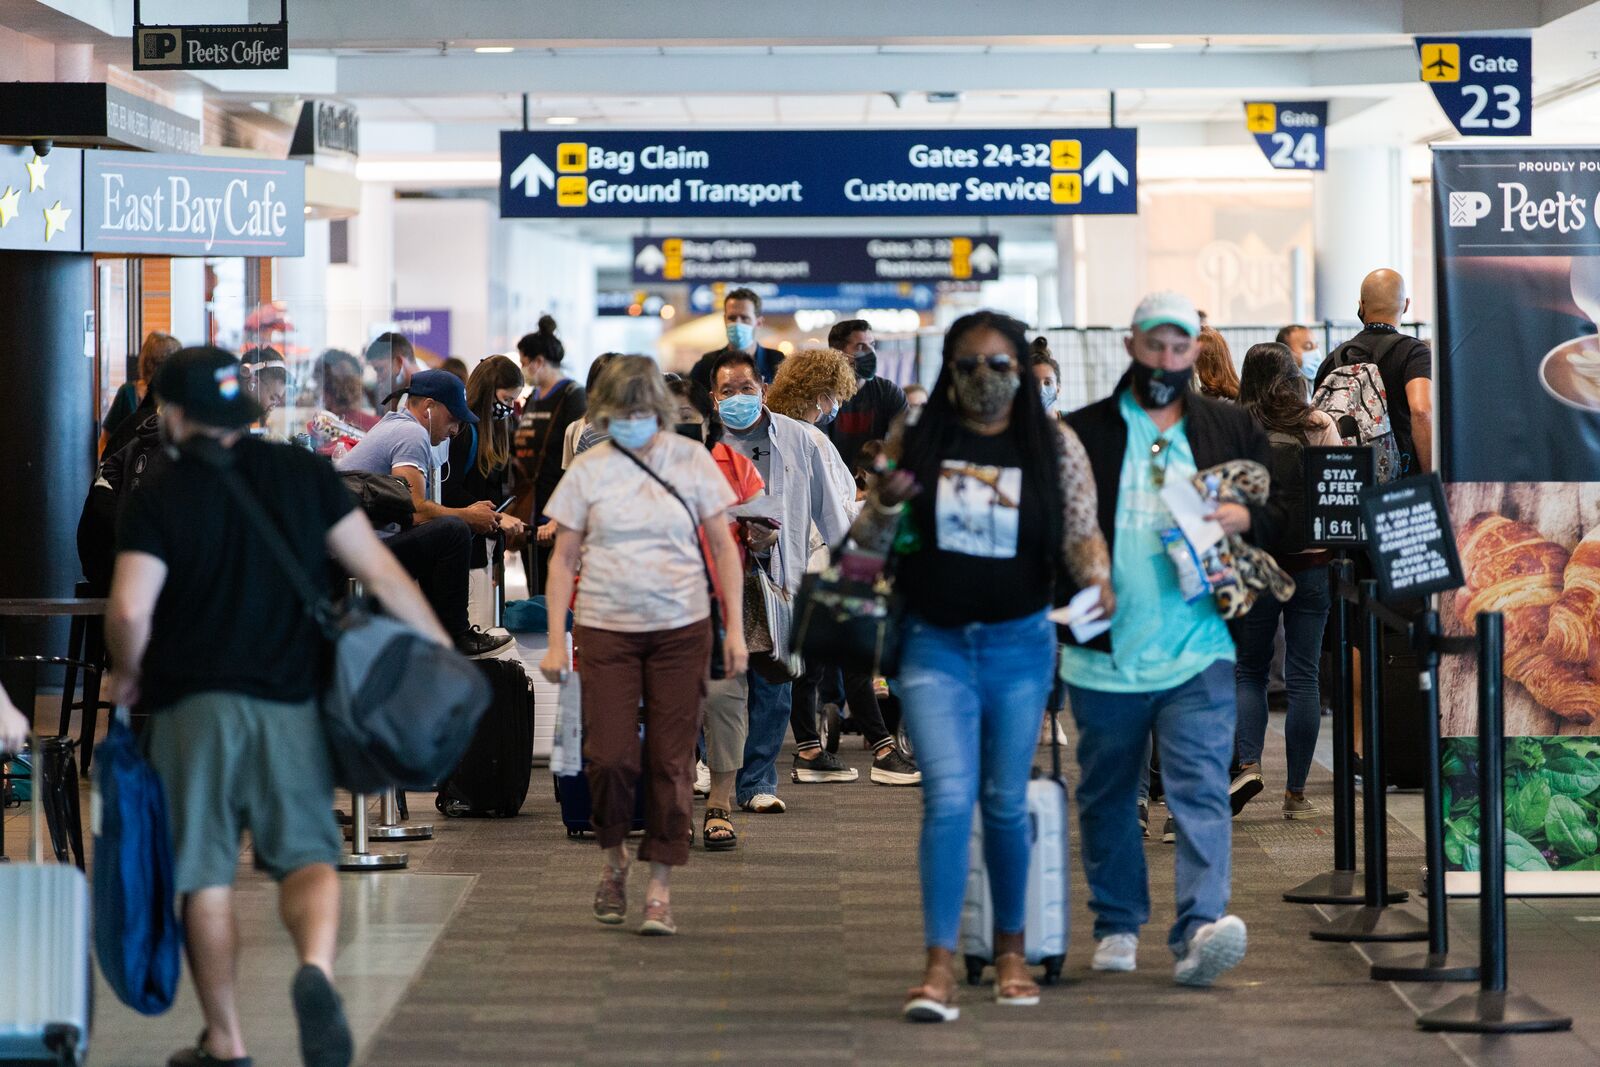 A crowd of people wearing face masks and carrying bags walk through an airport terminal. The passengers are flanked on both sides by signs for different airport gates and eateries.